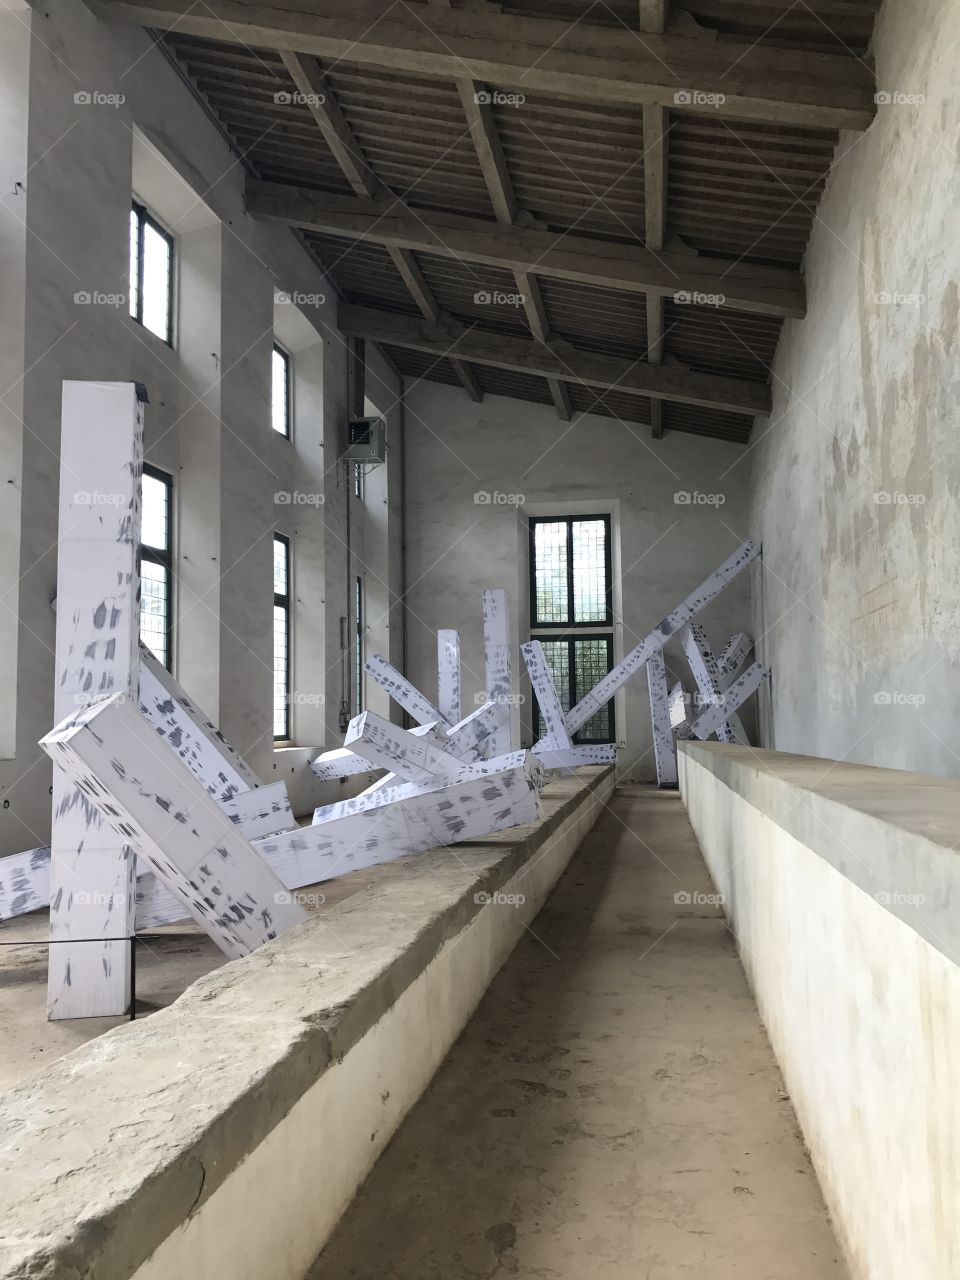 Contemporary Art litters that grounds of Pitti Palace in Florence, this Renaissance Palazzo, provides stark striking contrast for the artists abstract vision! 